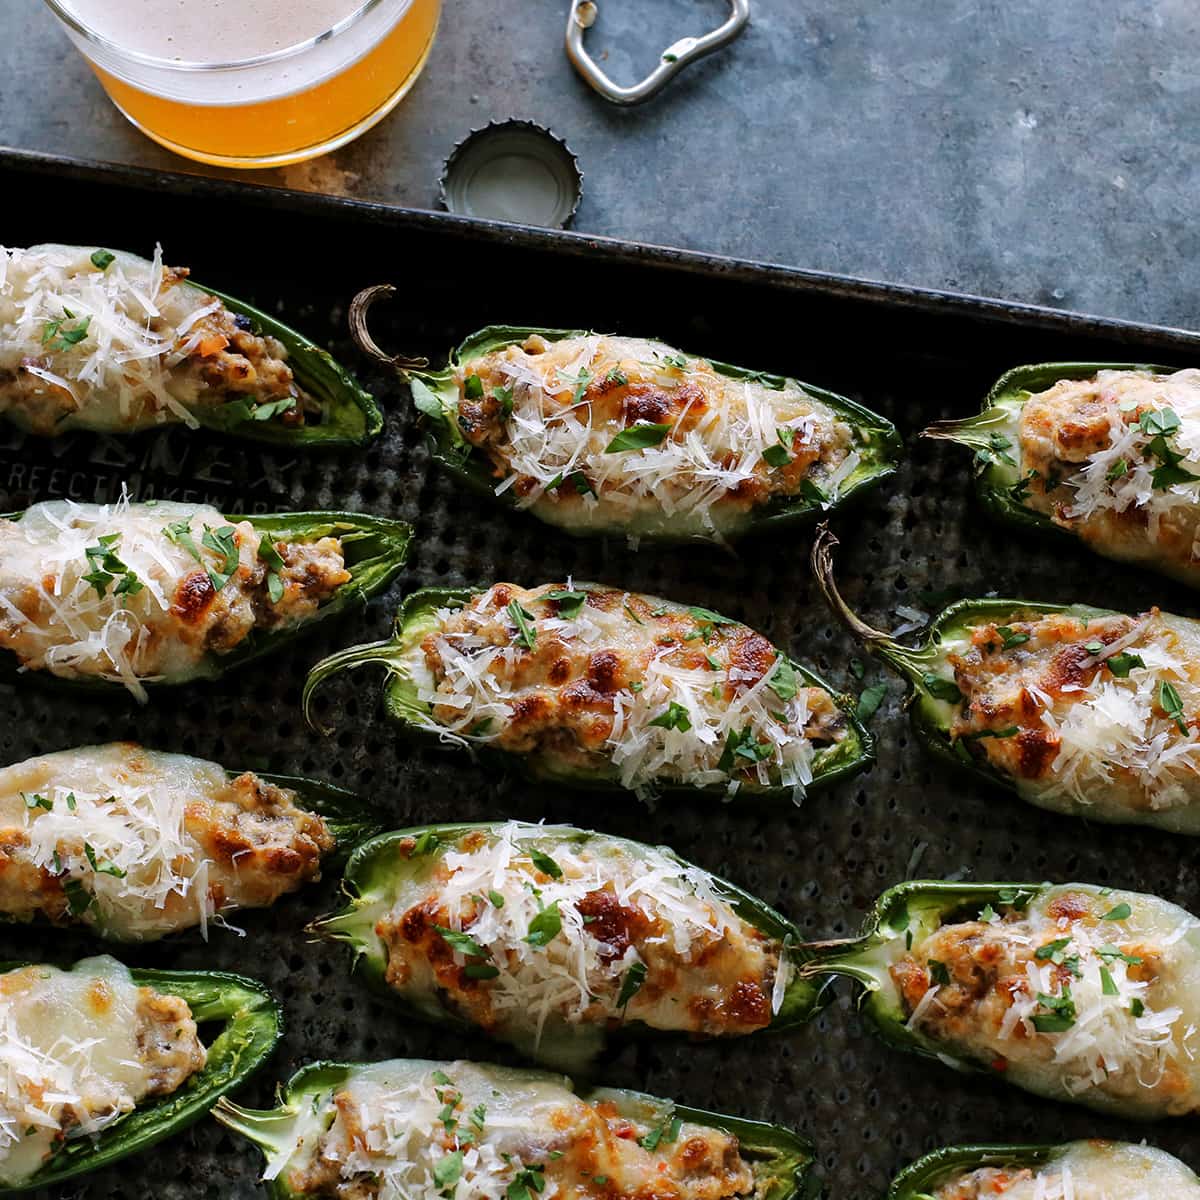 baked jalapeno poppers